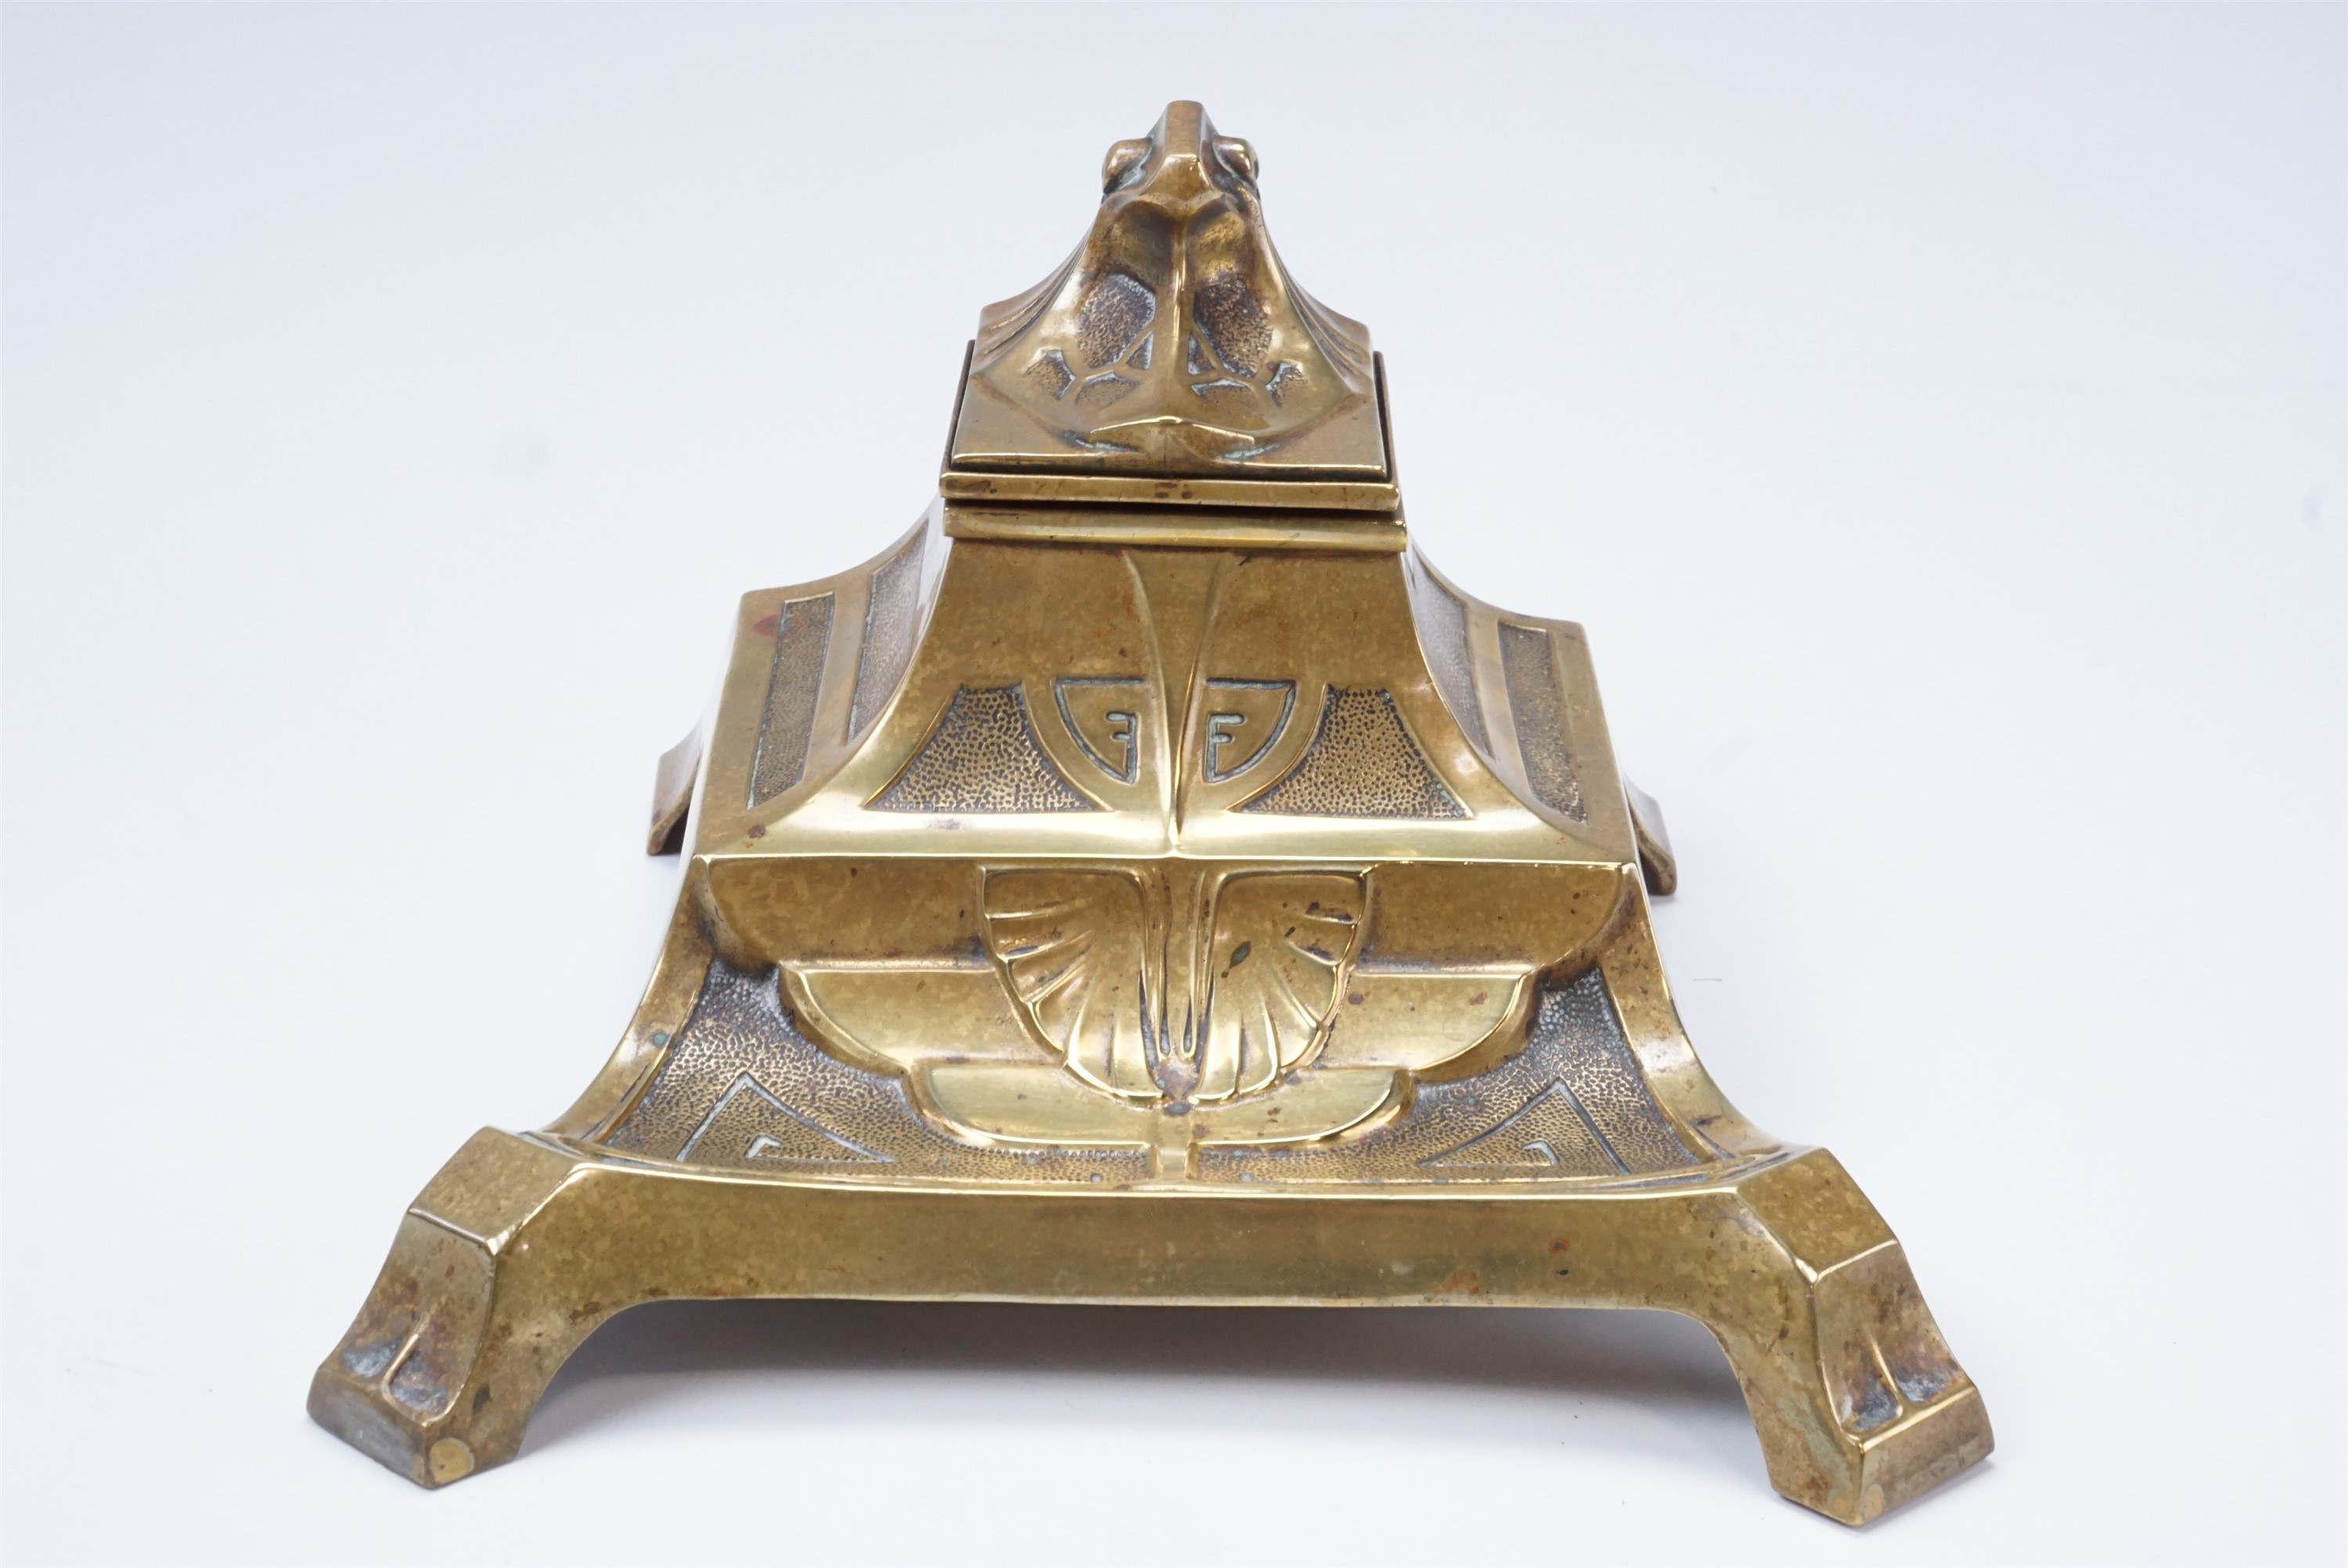 A Jugendstil cast brass standish, having a single inkwell with a stylized eagle's head cover, on a